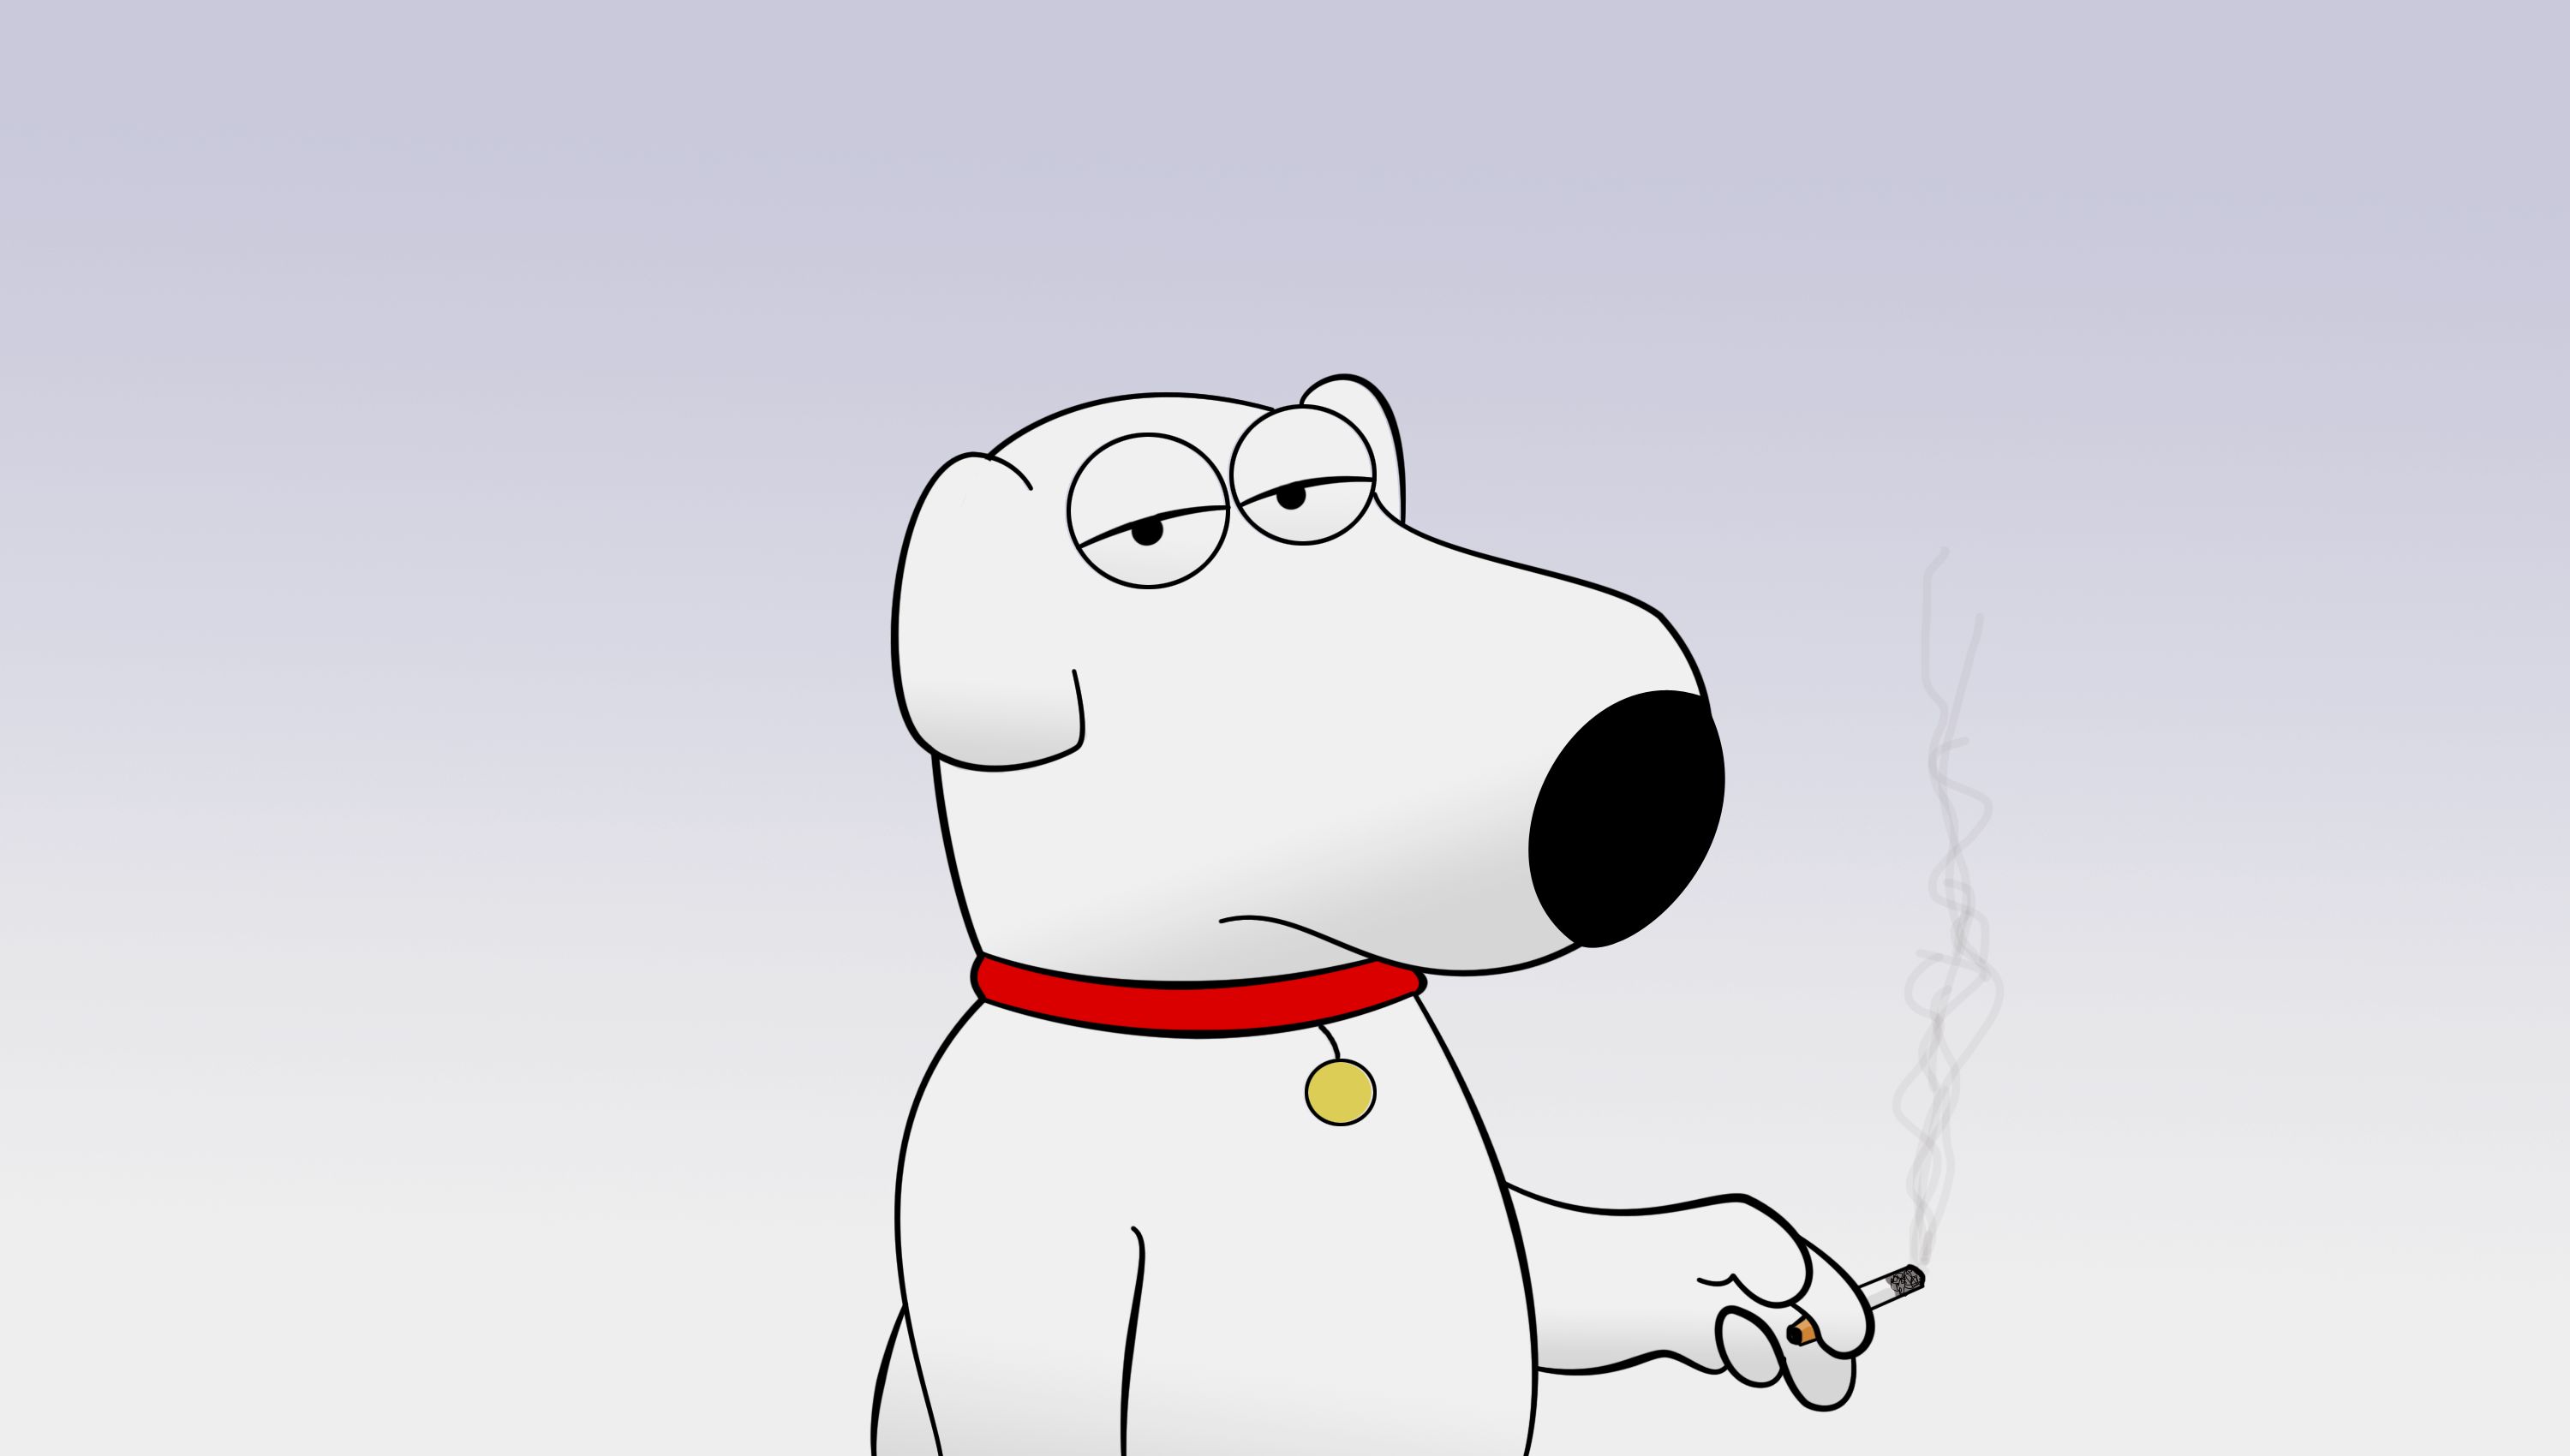 Brian Griffin from the TV show Family Guy as a desktop wallpaper.